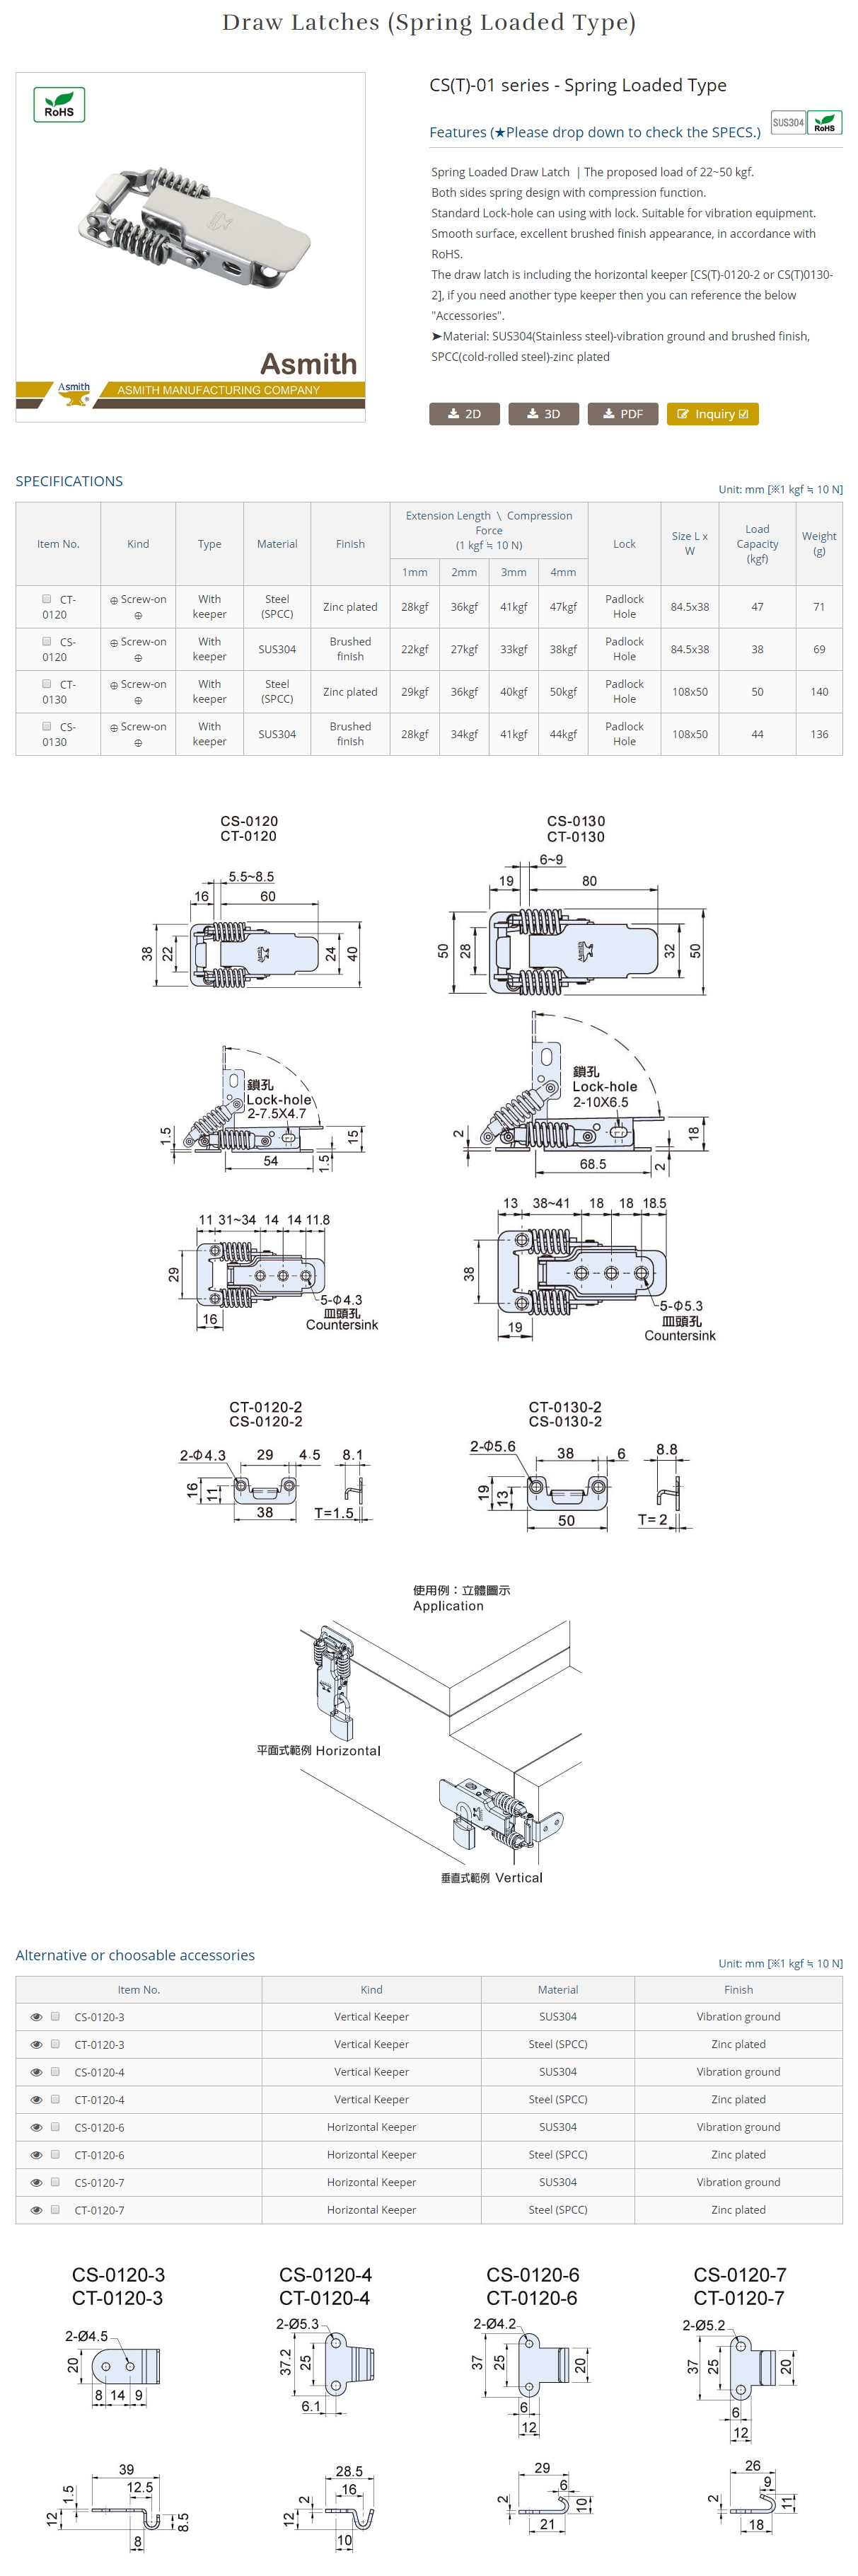 CS(T)-01 series Spring Loaded Draw Latches